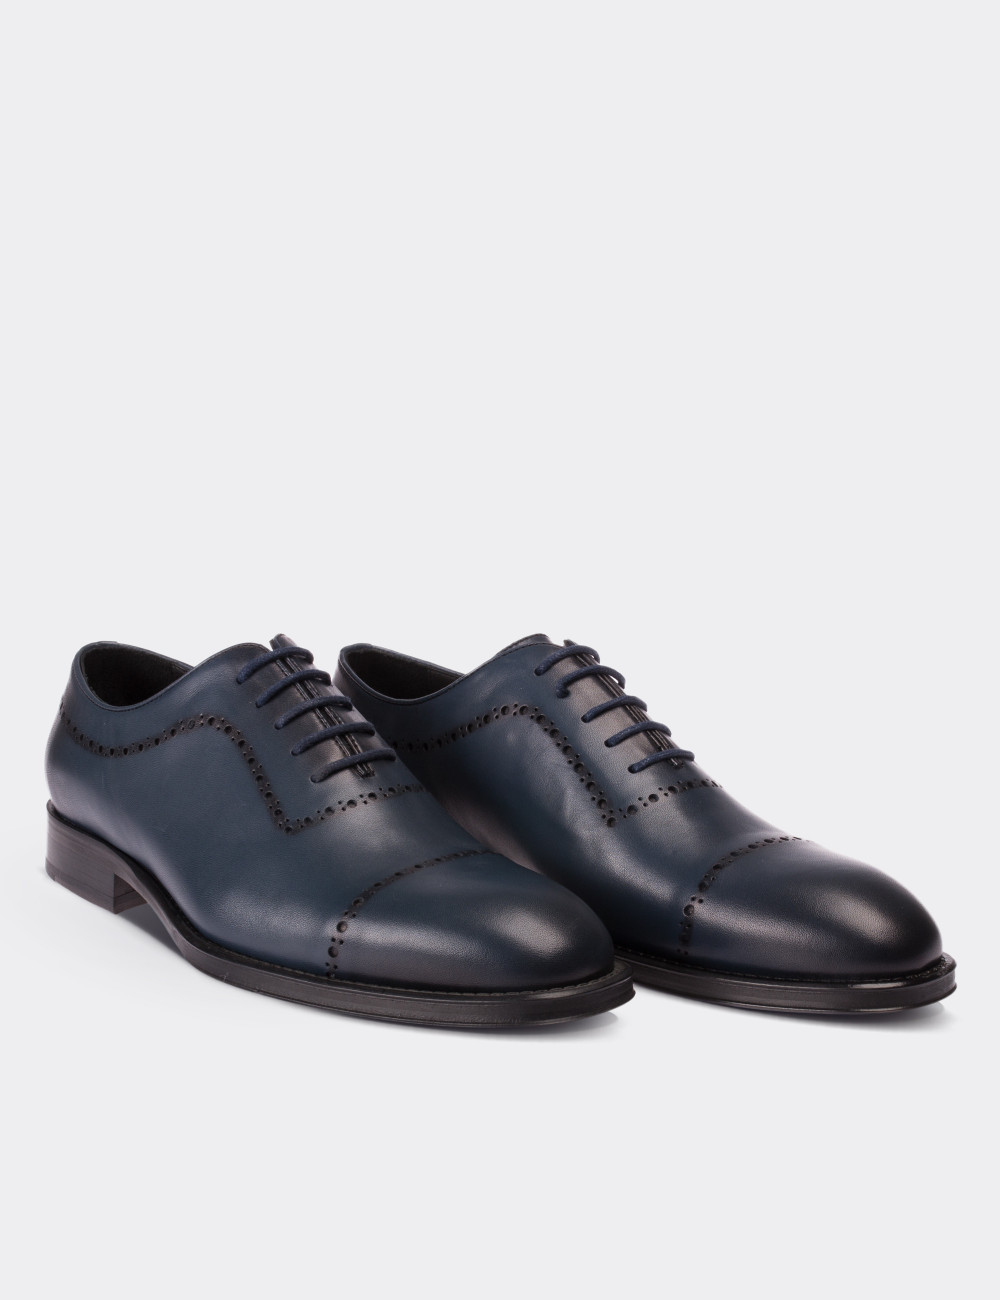 Navy  Leather Classic Shoes - 01491MLCVK01